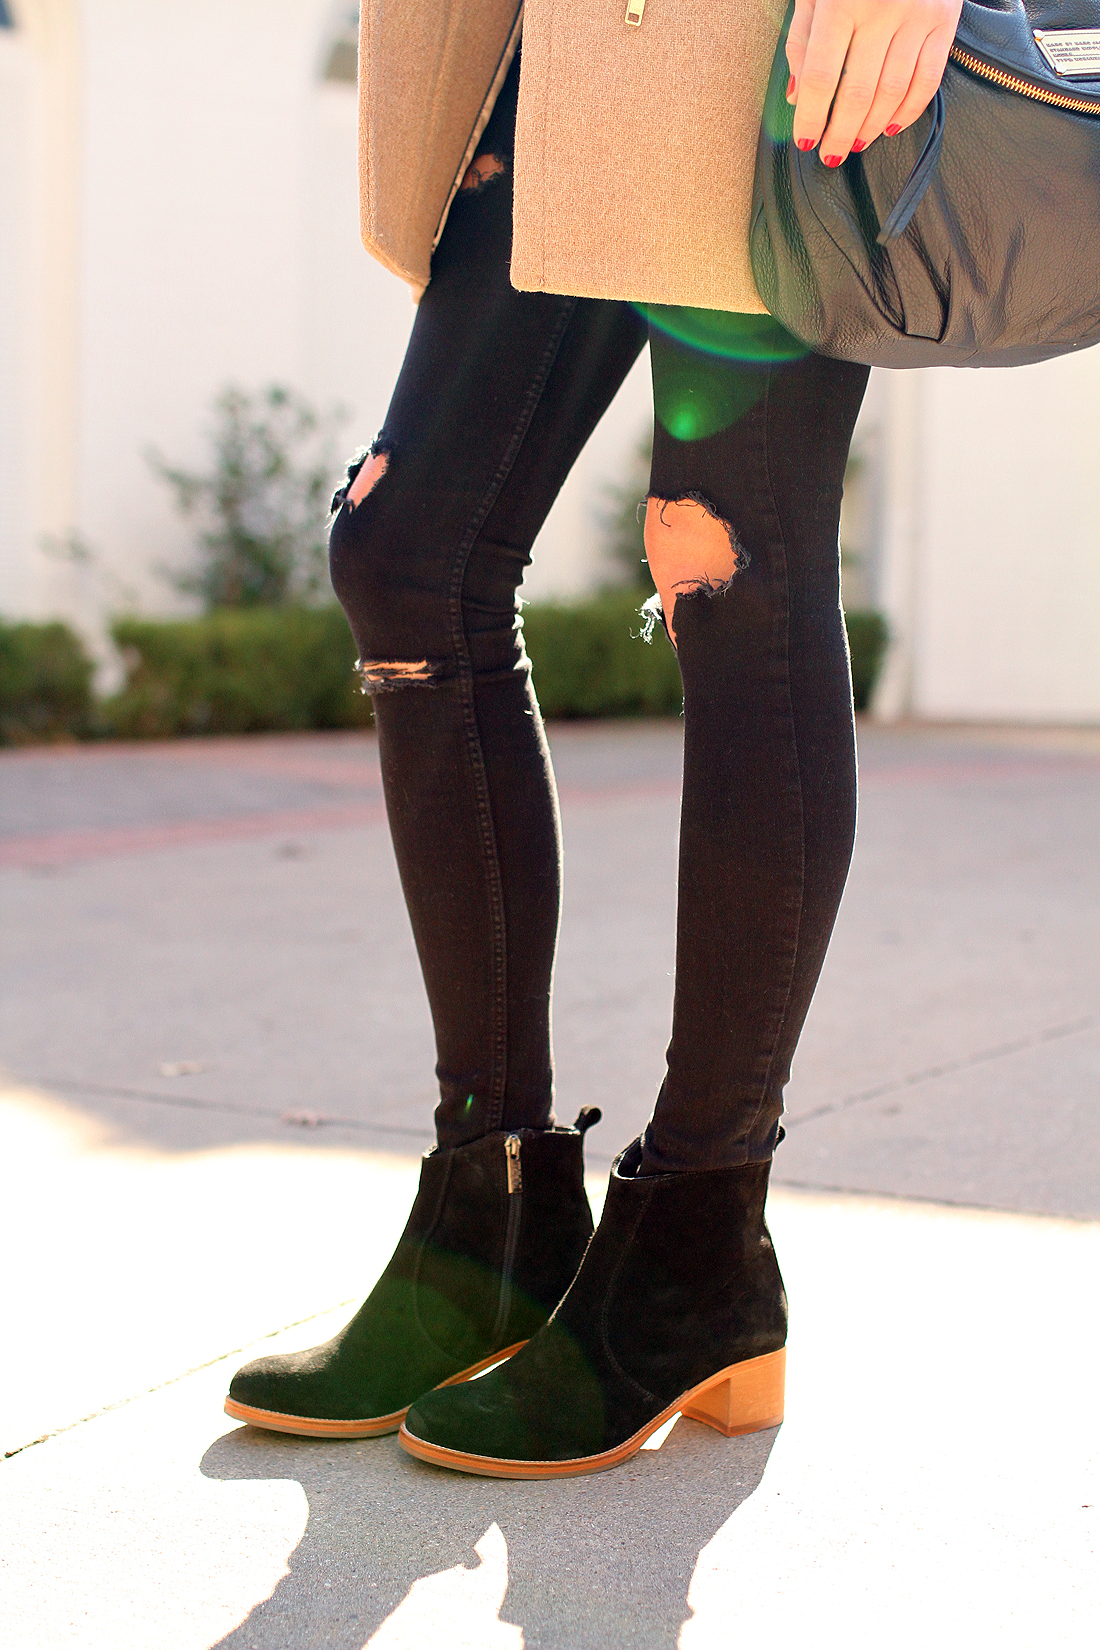 fashion-jackson-black-ripped-skinny-jeans-black-ankle-booties